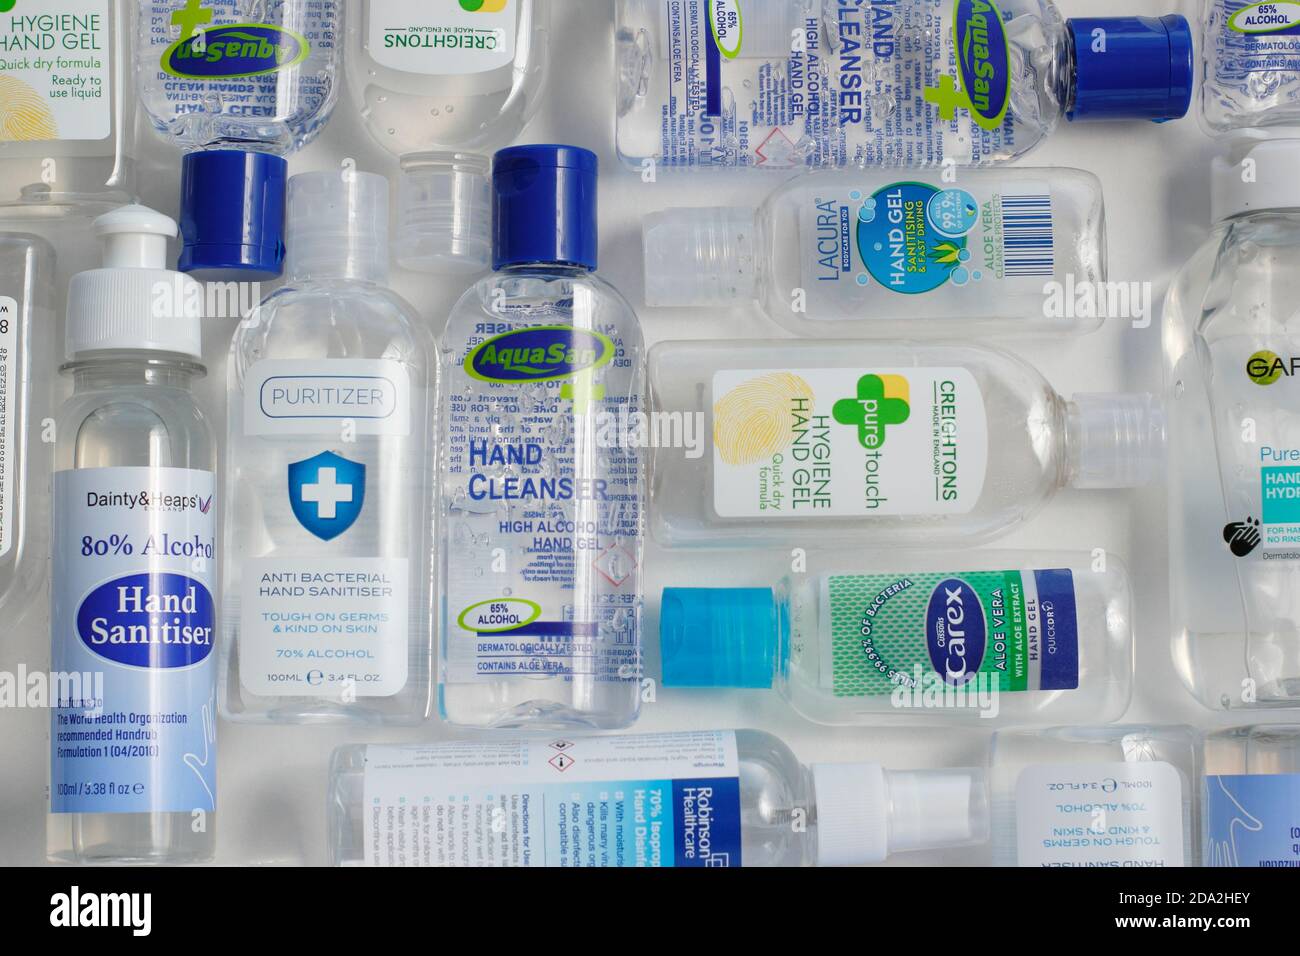 Hand sanitizer. Selection of plastic bottles containing hand sanitiser with varying alcohol content. UK Stock Photo